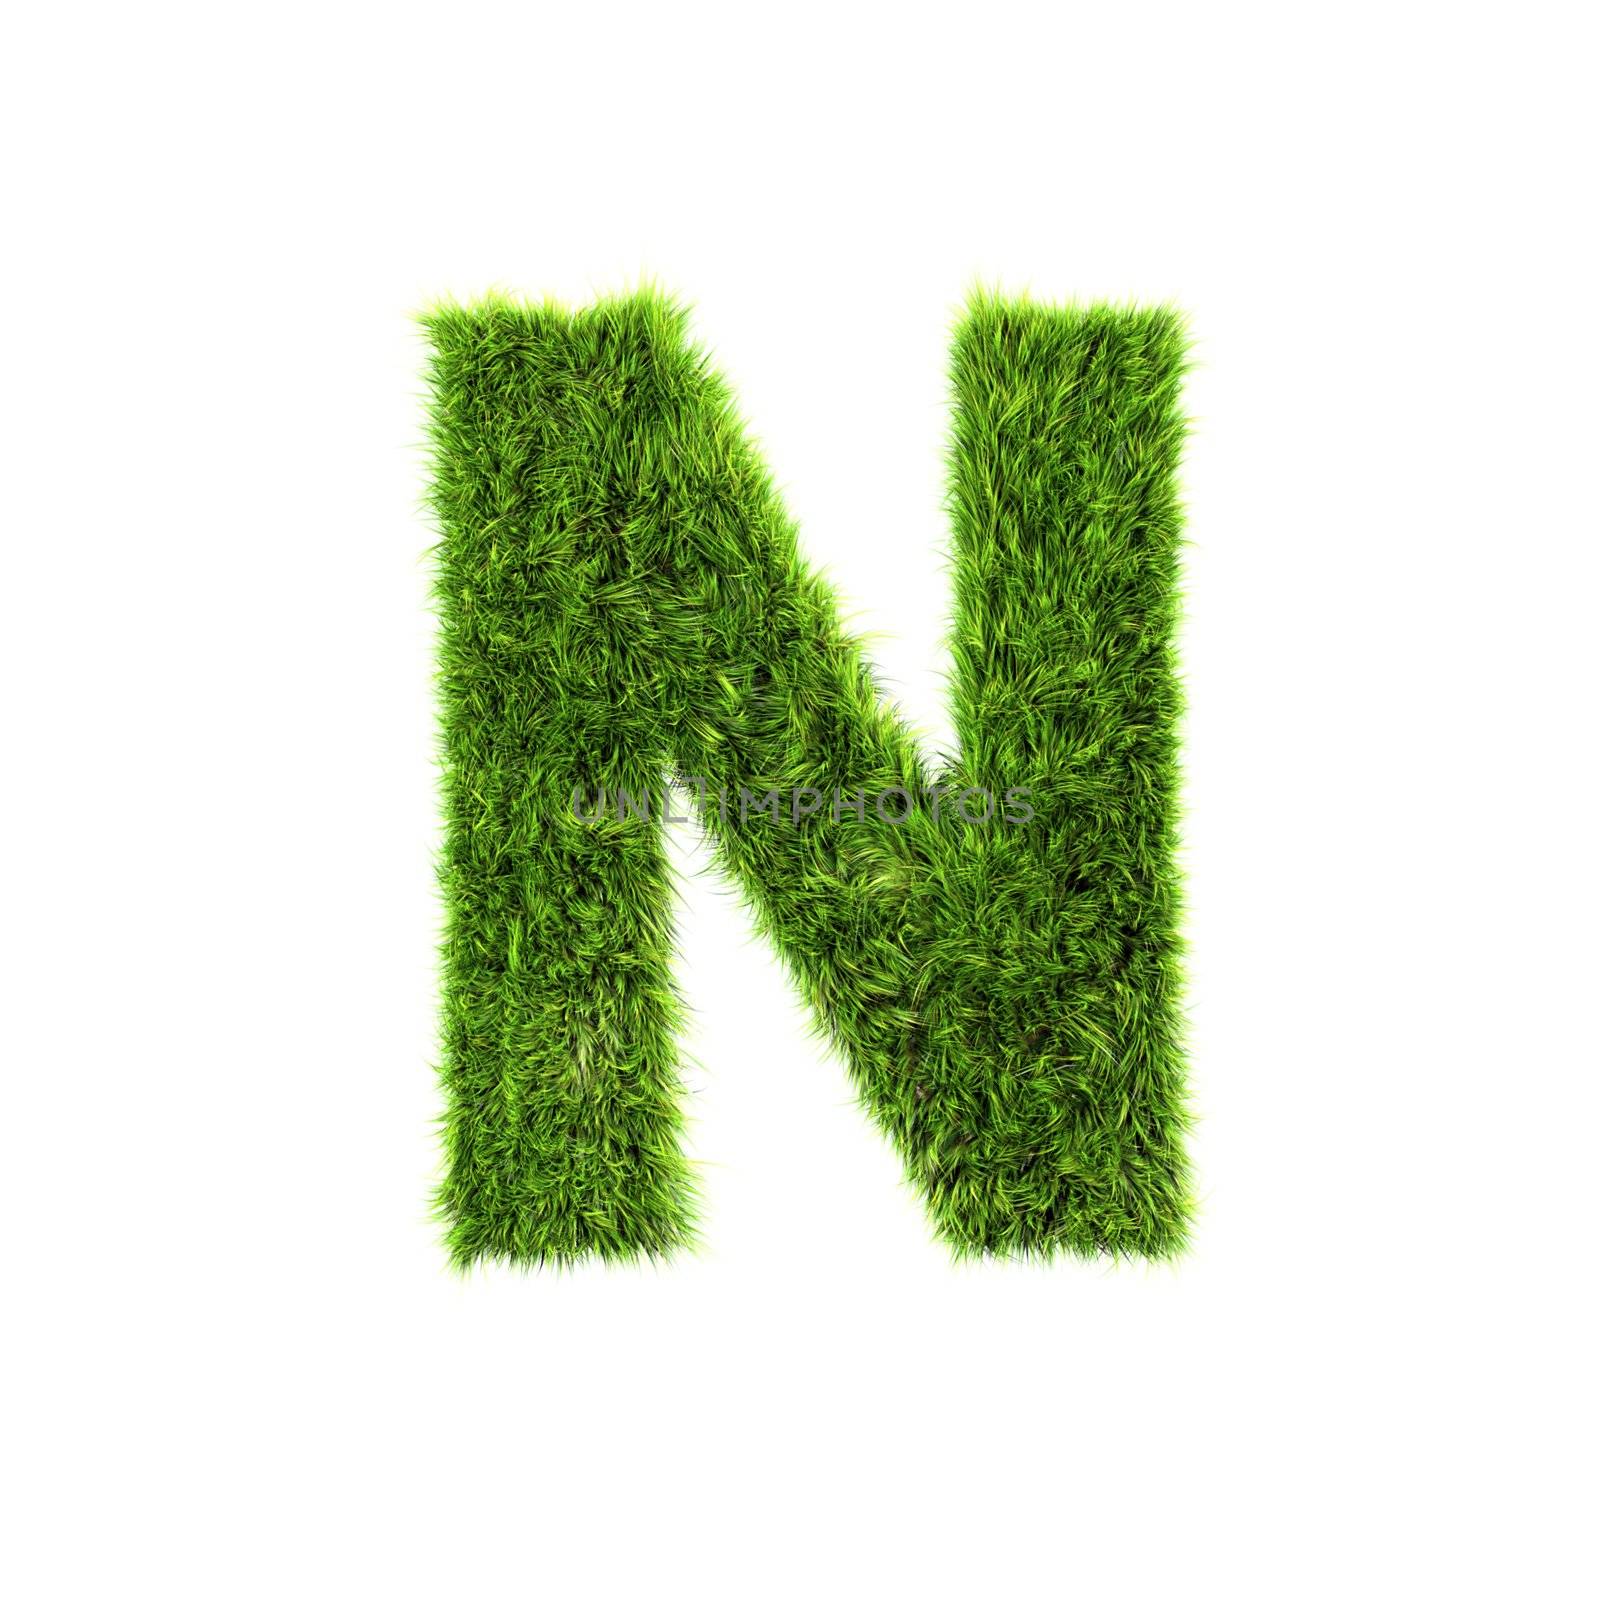 3d grass letter isolated on white background - N by chrisroll